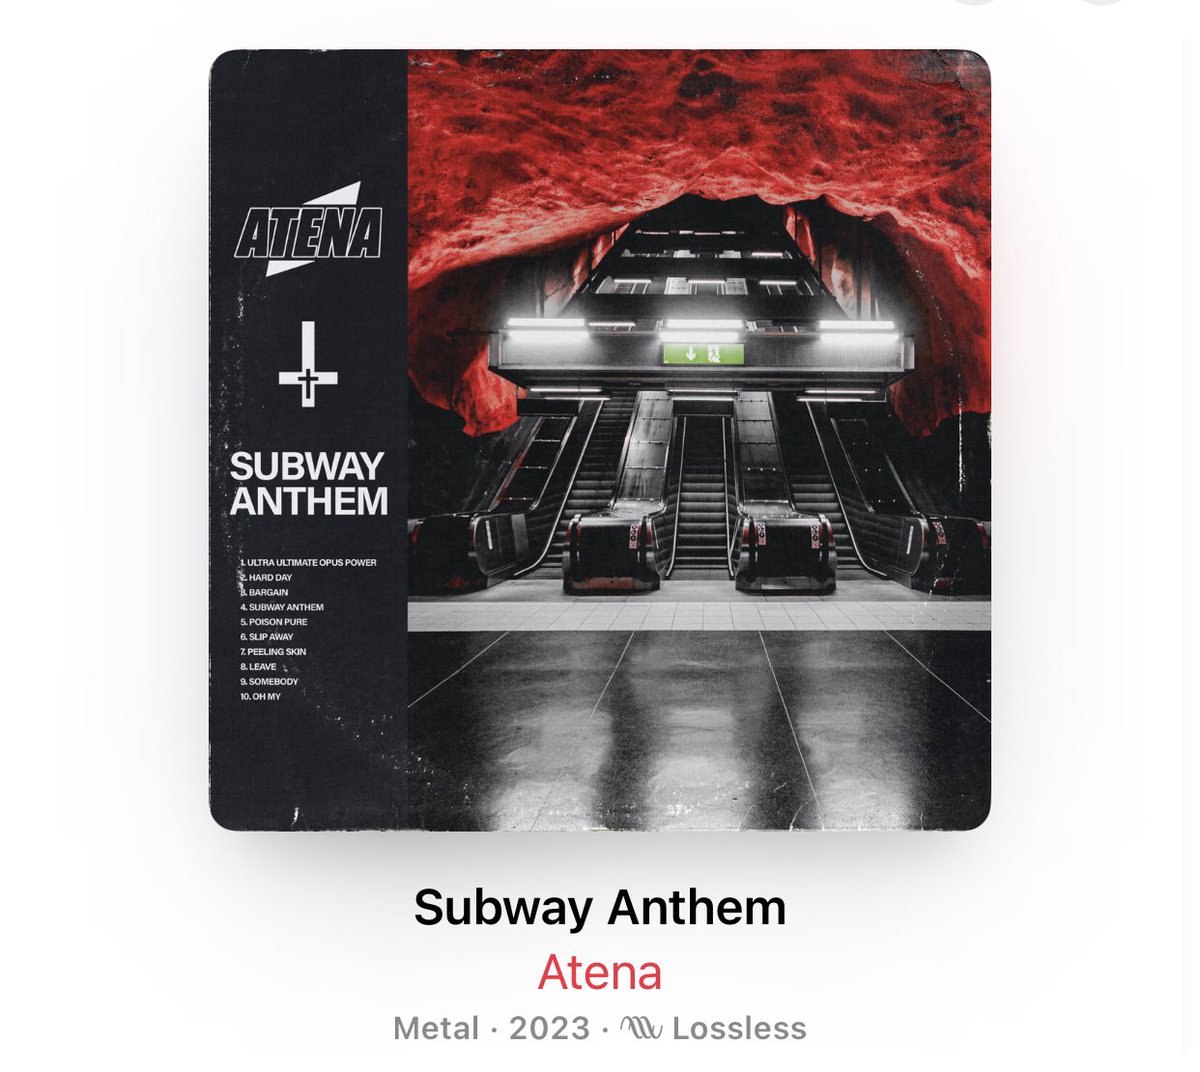 @atenaband new album comes and it’s no surprise this album absolutely slaps. i am BLOWN away by the production and writing of this album. this album is in my top 5 best albums of 2023! 

if you’re into metalcore, i bet you haven’t heard these guys but you will. 

LISTEN TO THEM!